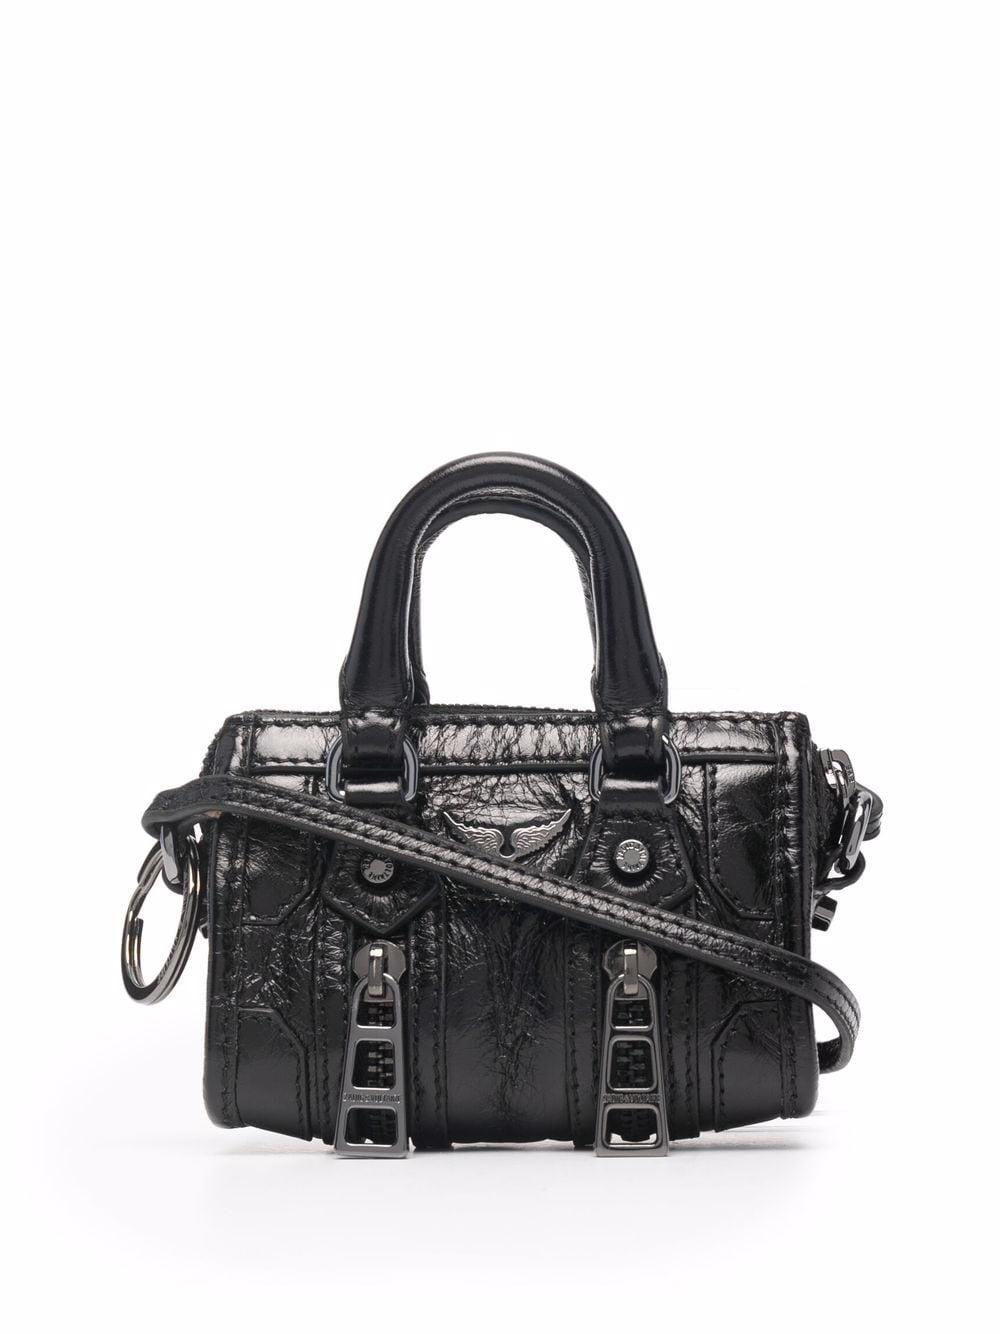 Zadig & Voltaire Authenticated Leather Handbag